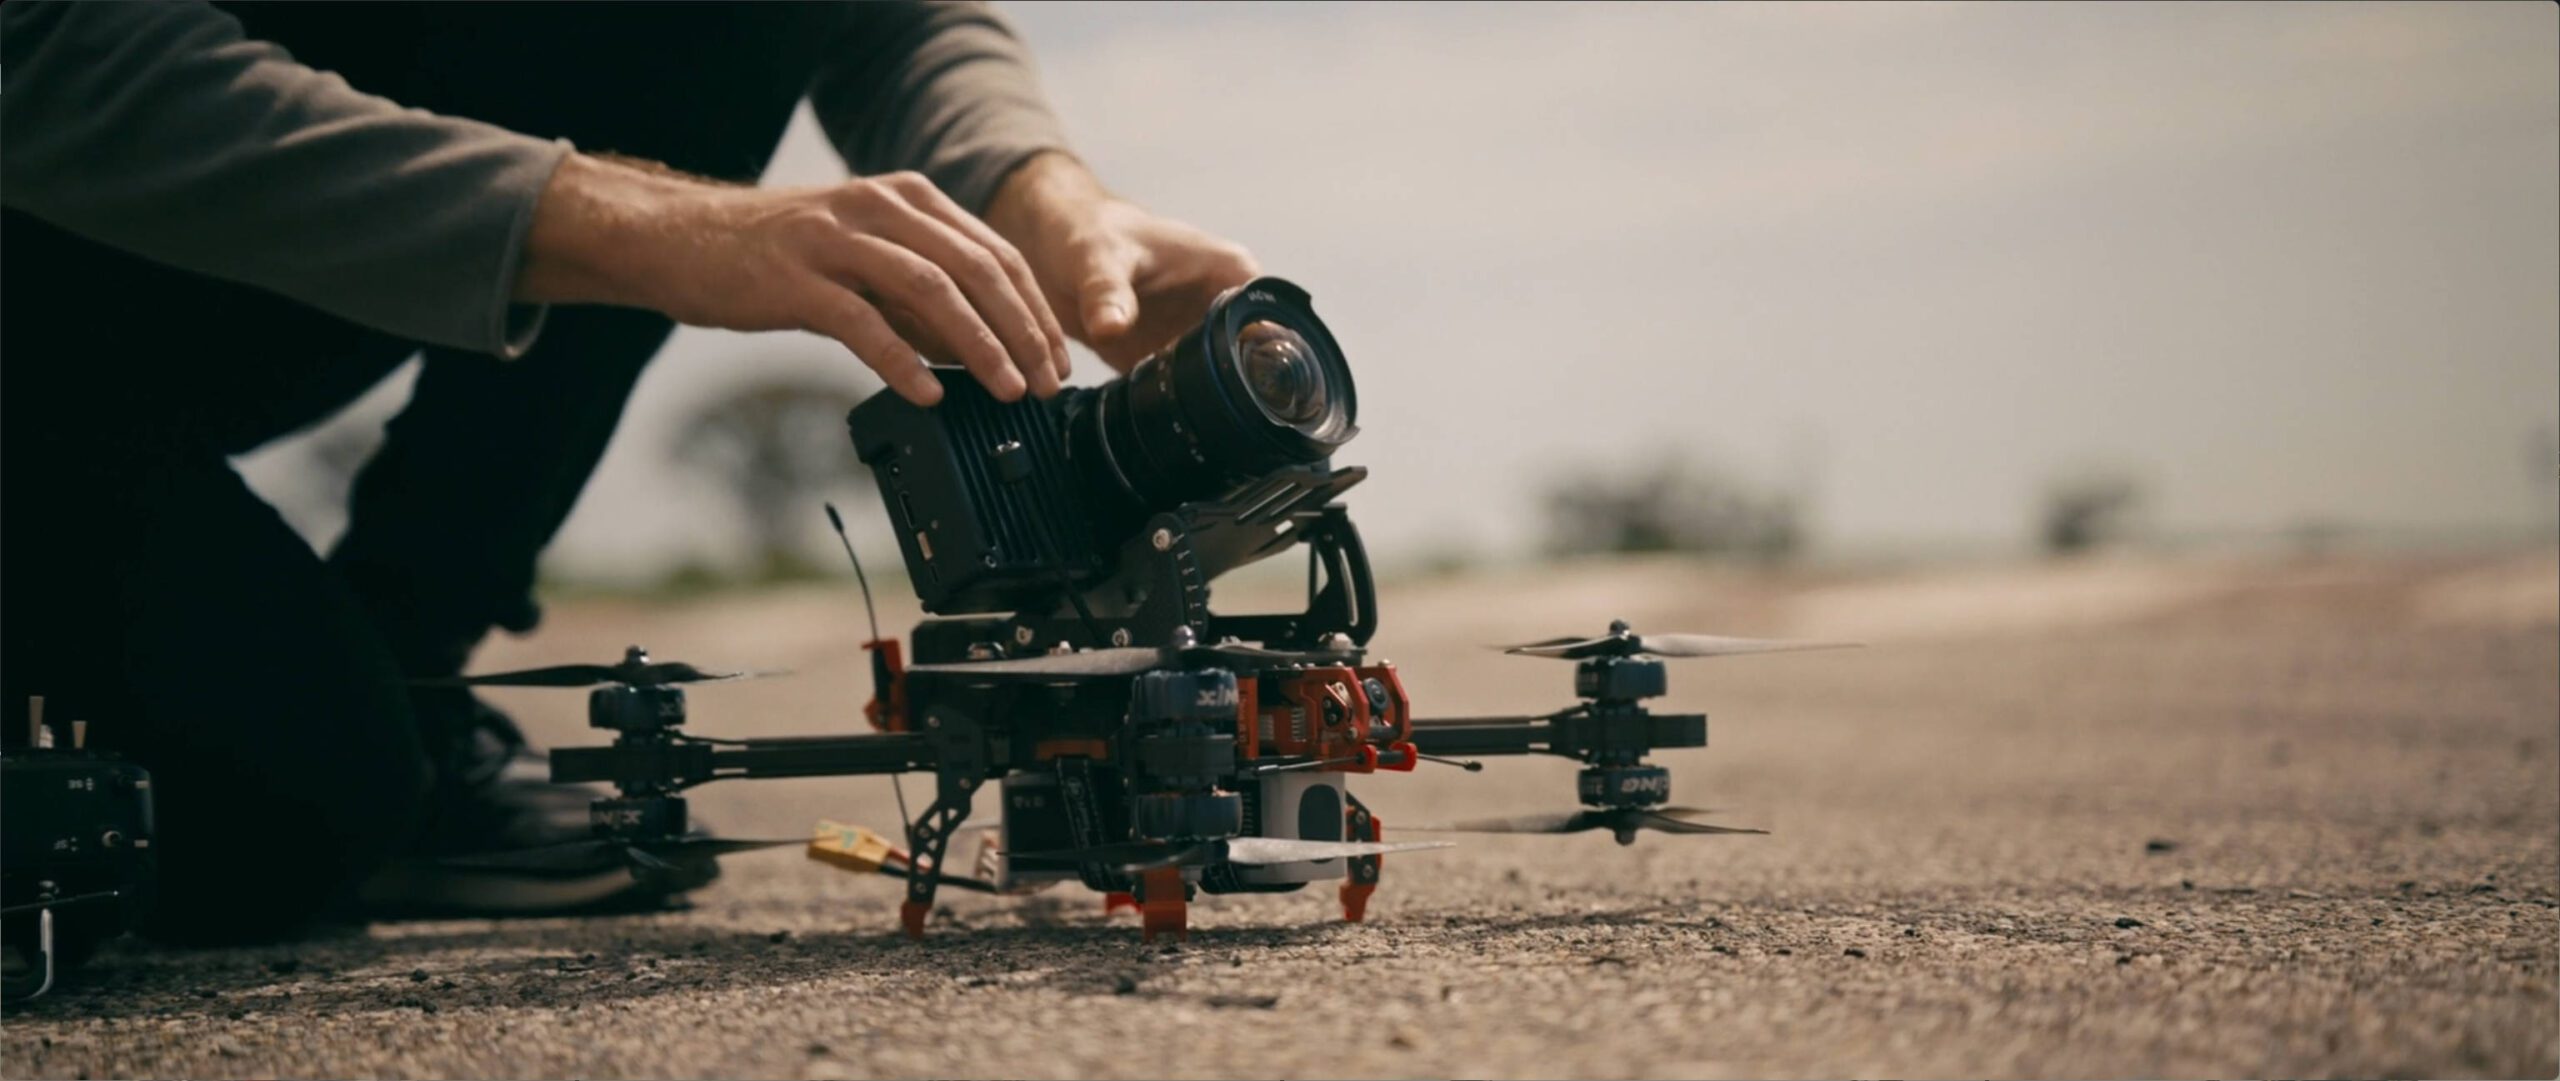 How to Incorporate Drone Footage in Your Video Projects